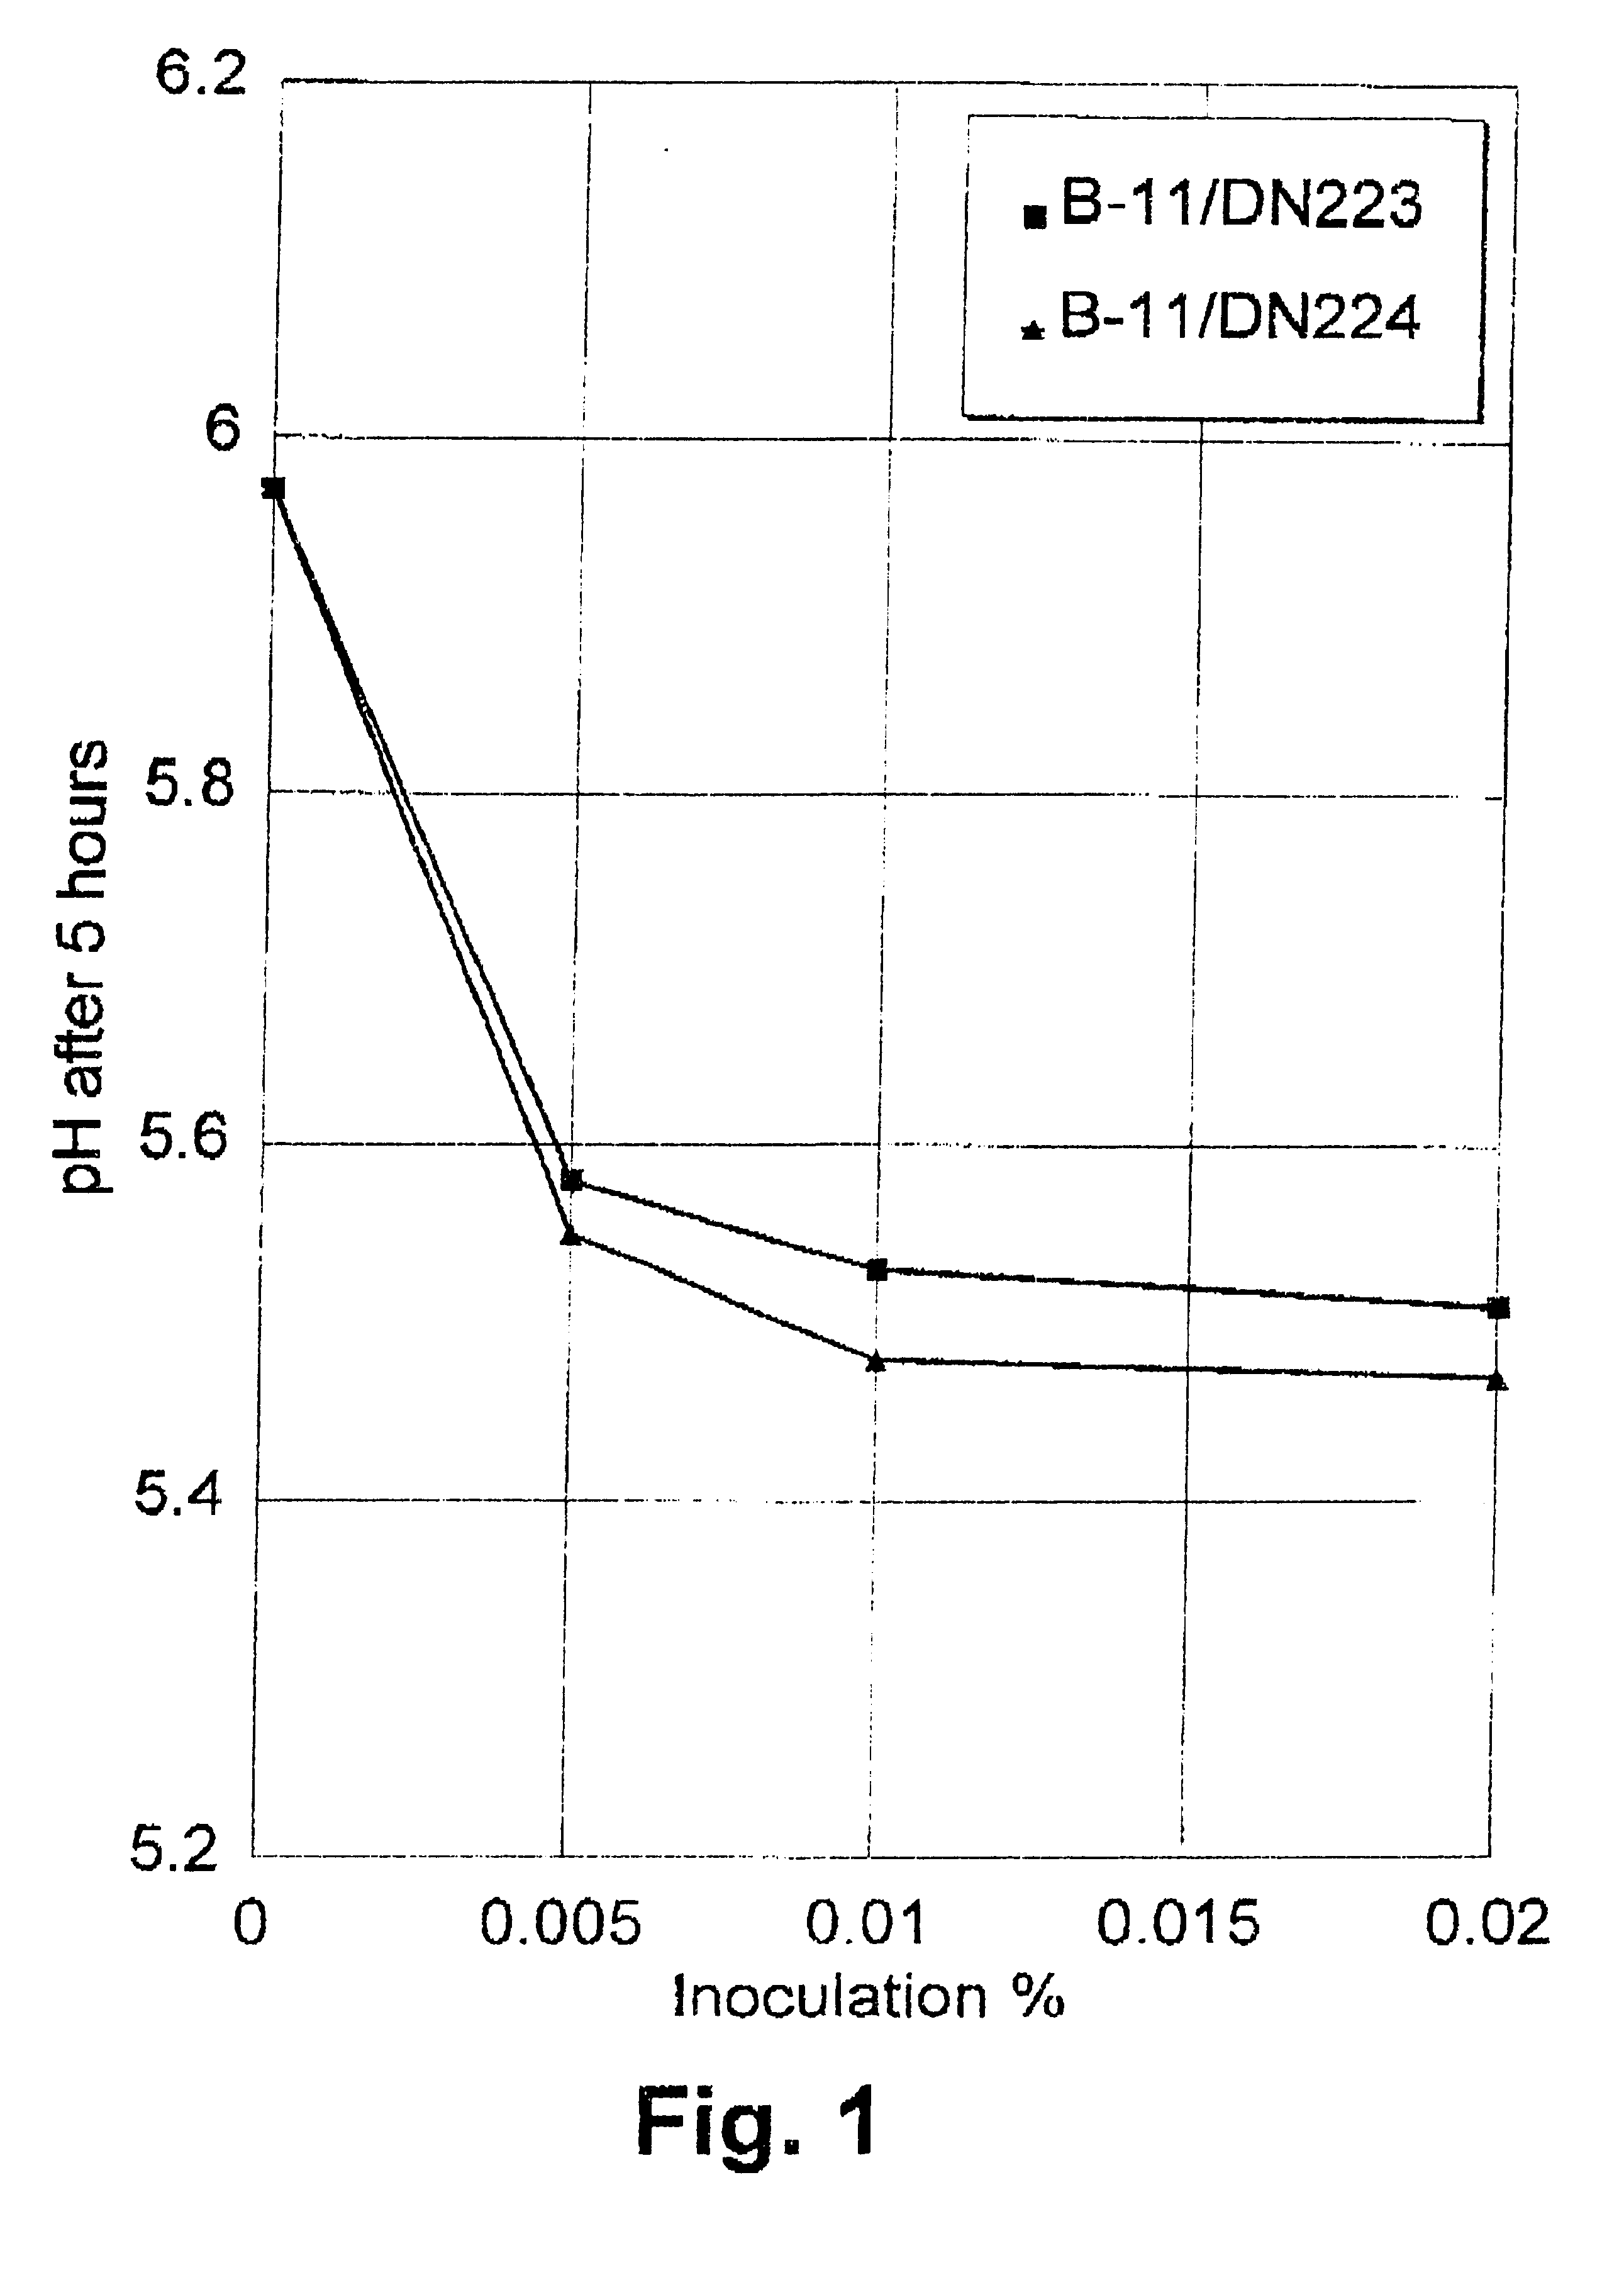 Method of improving the efficacy of lactic acid bacterial starter cultures and improved starter culture compositions